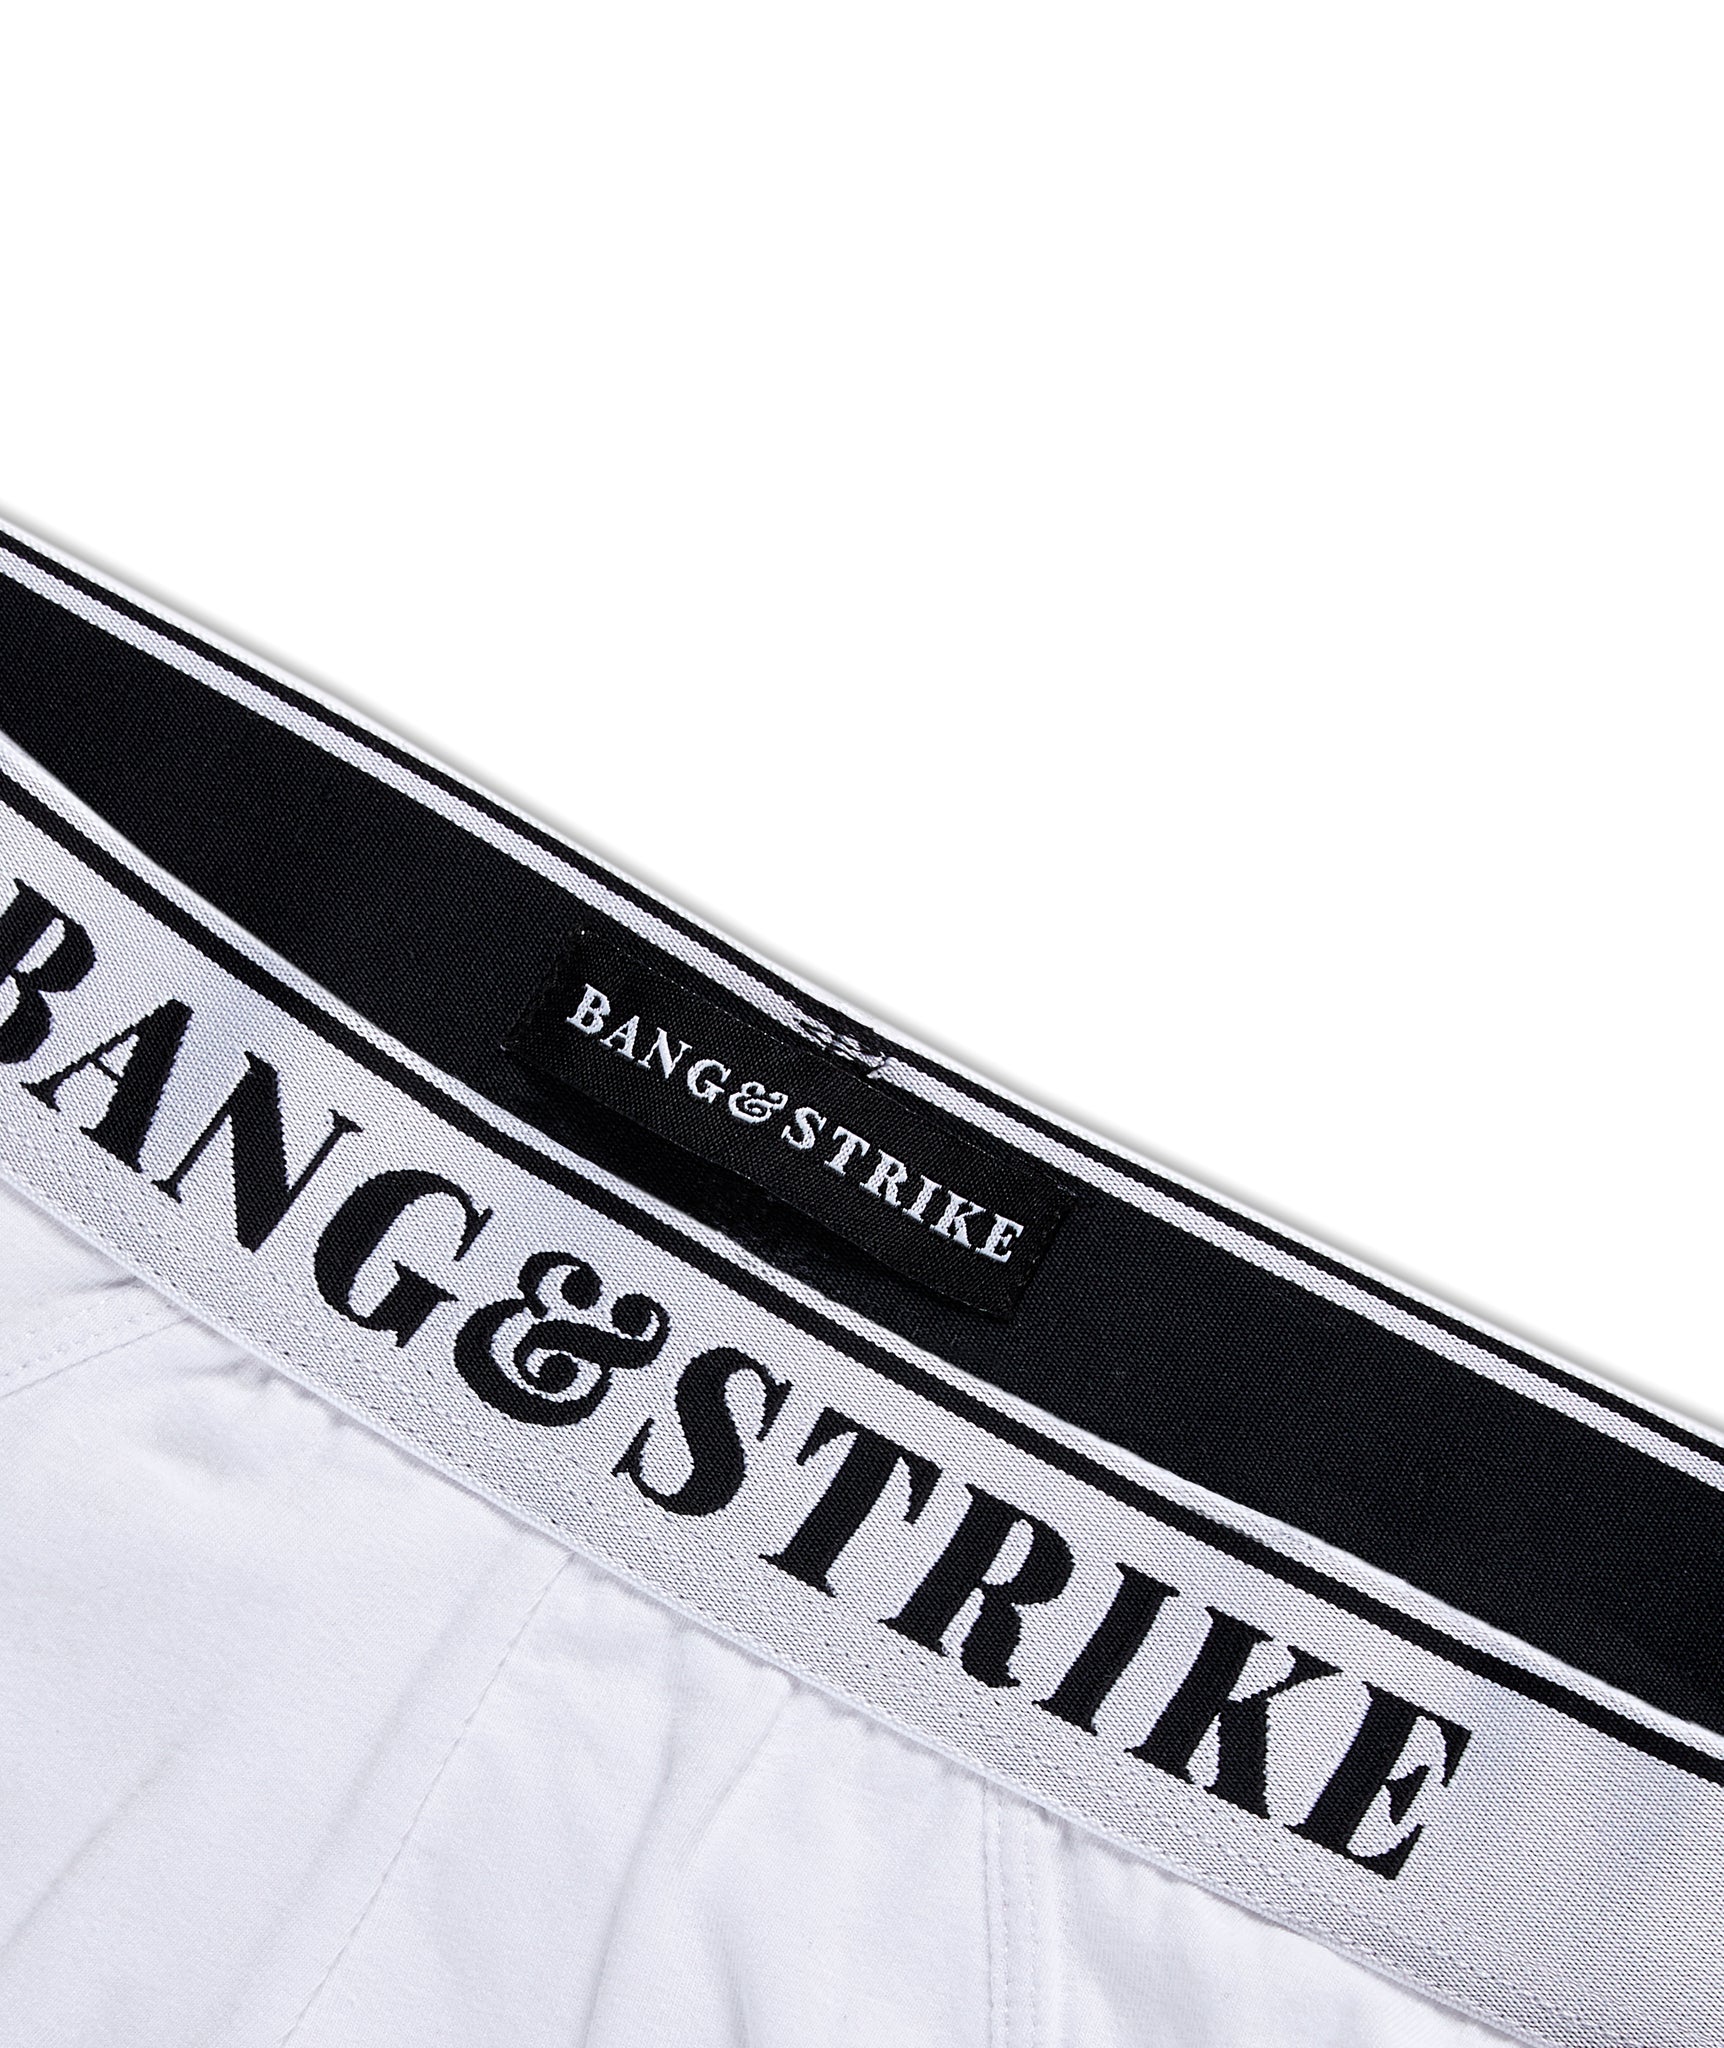 BANG&STRIKE CORE Cotton Hip Brief White | Official Online Store - BANG ...